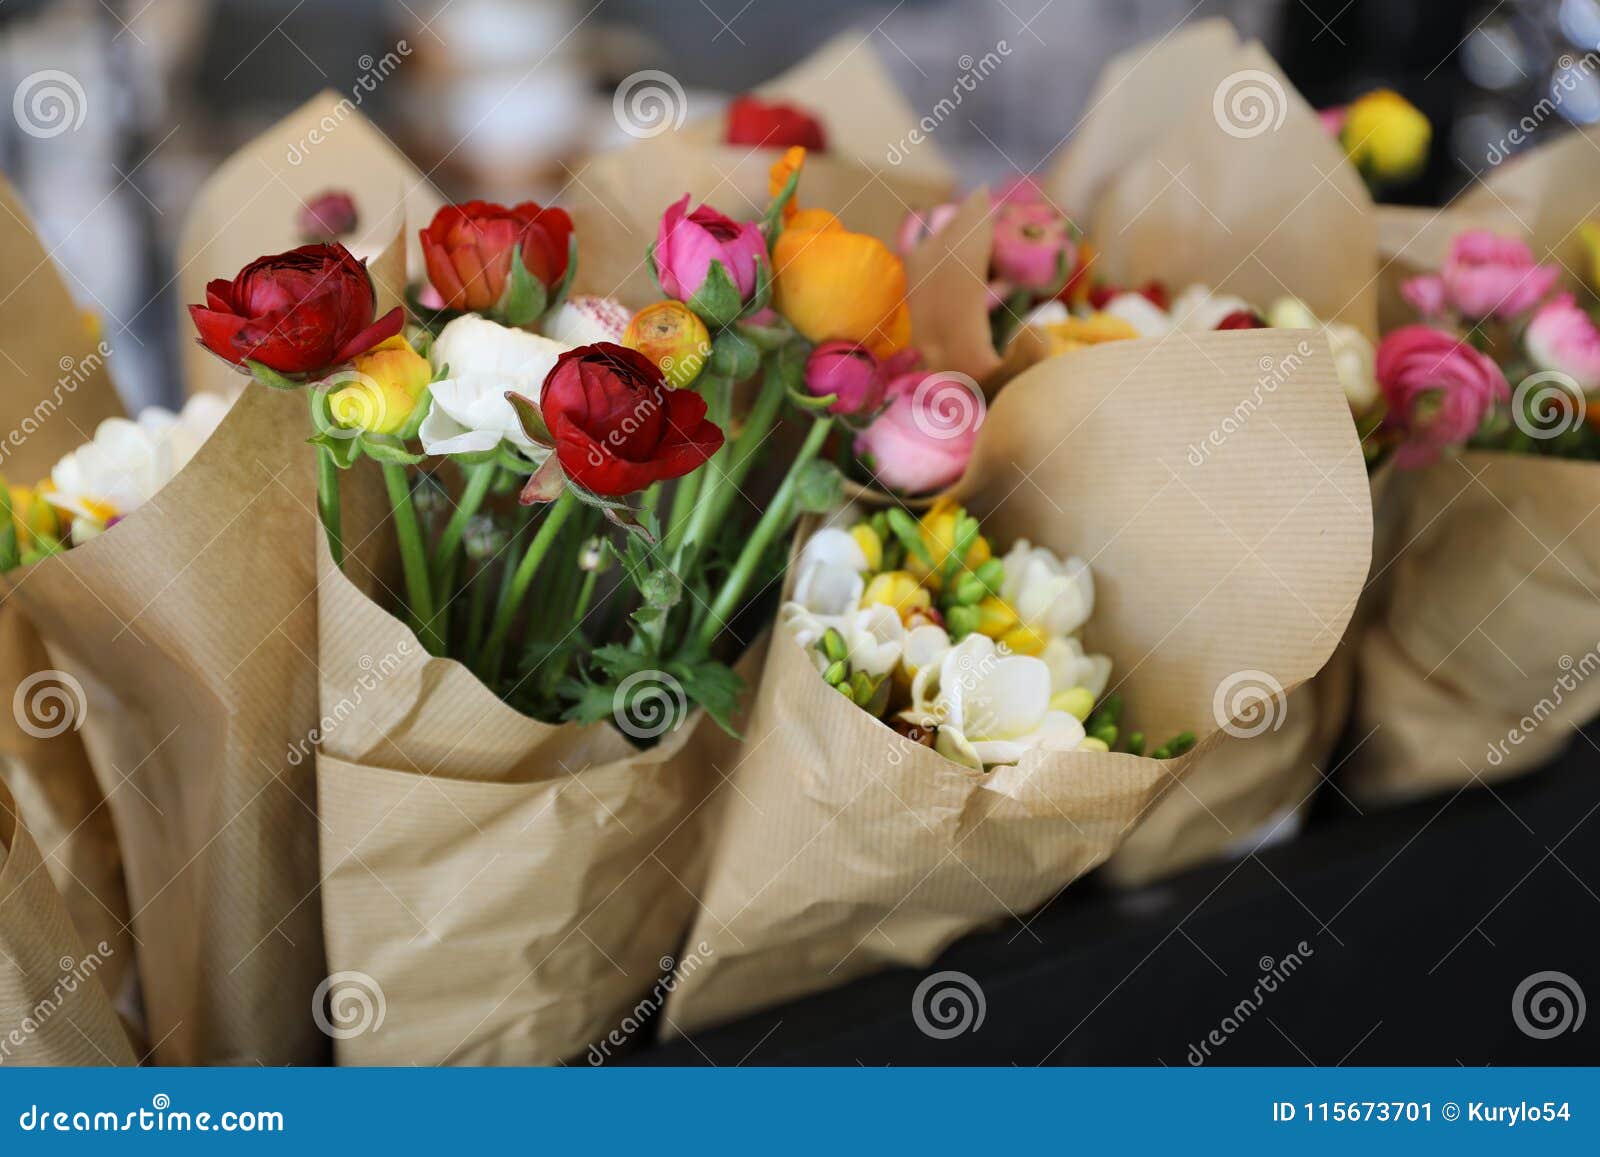 Colorful Persian Buttercup Flowers or Ranunculus Asiaticus Bouquet in ...